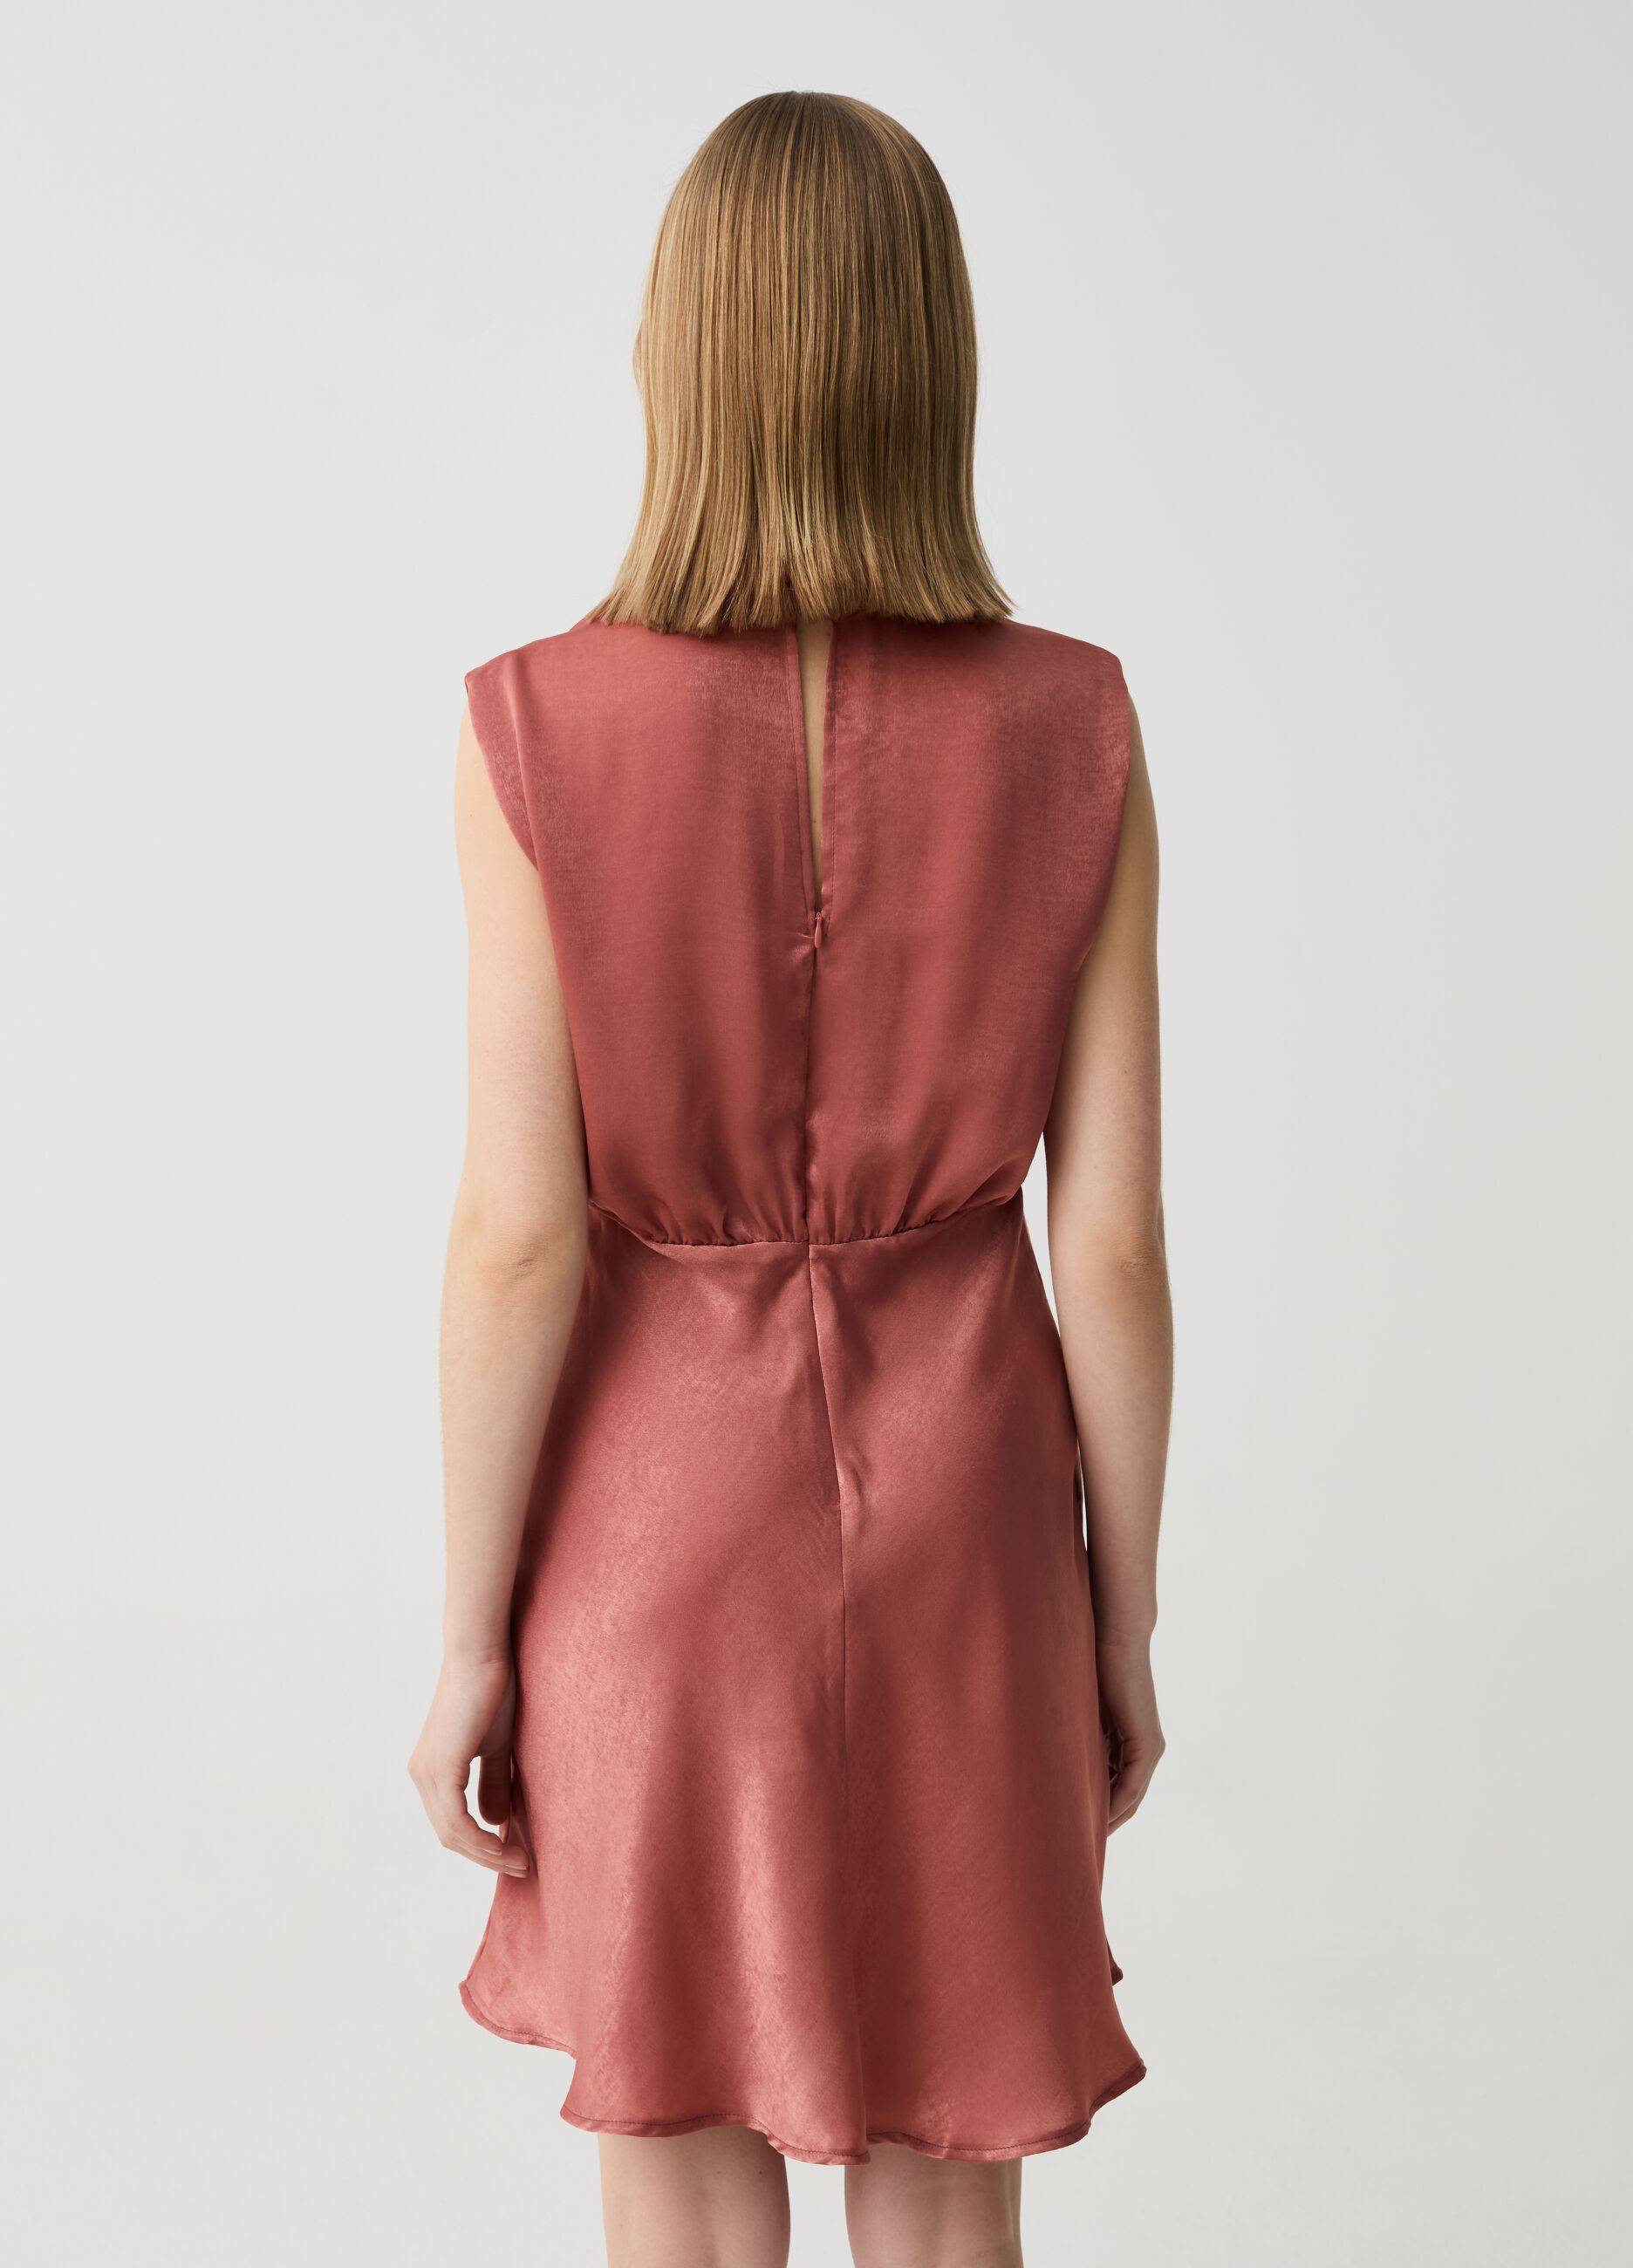 Sleeveless dress in satin with draping